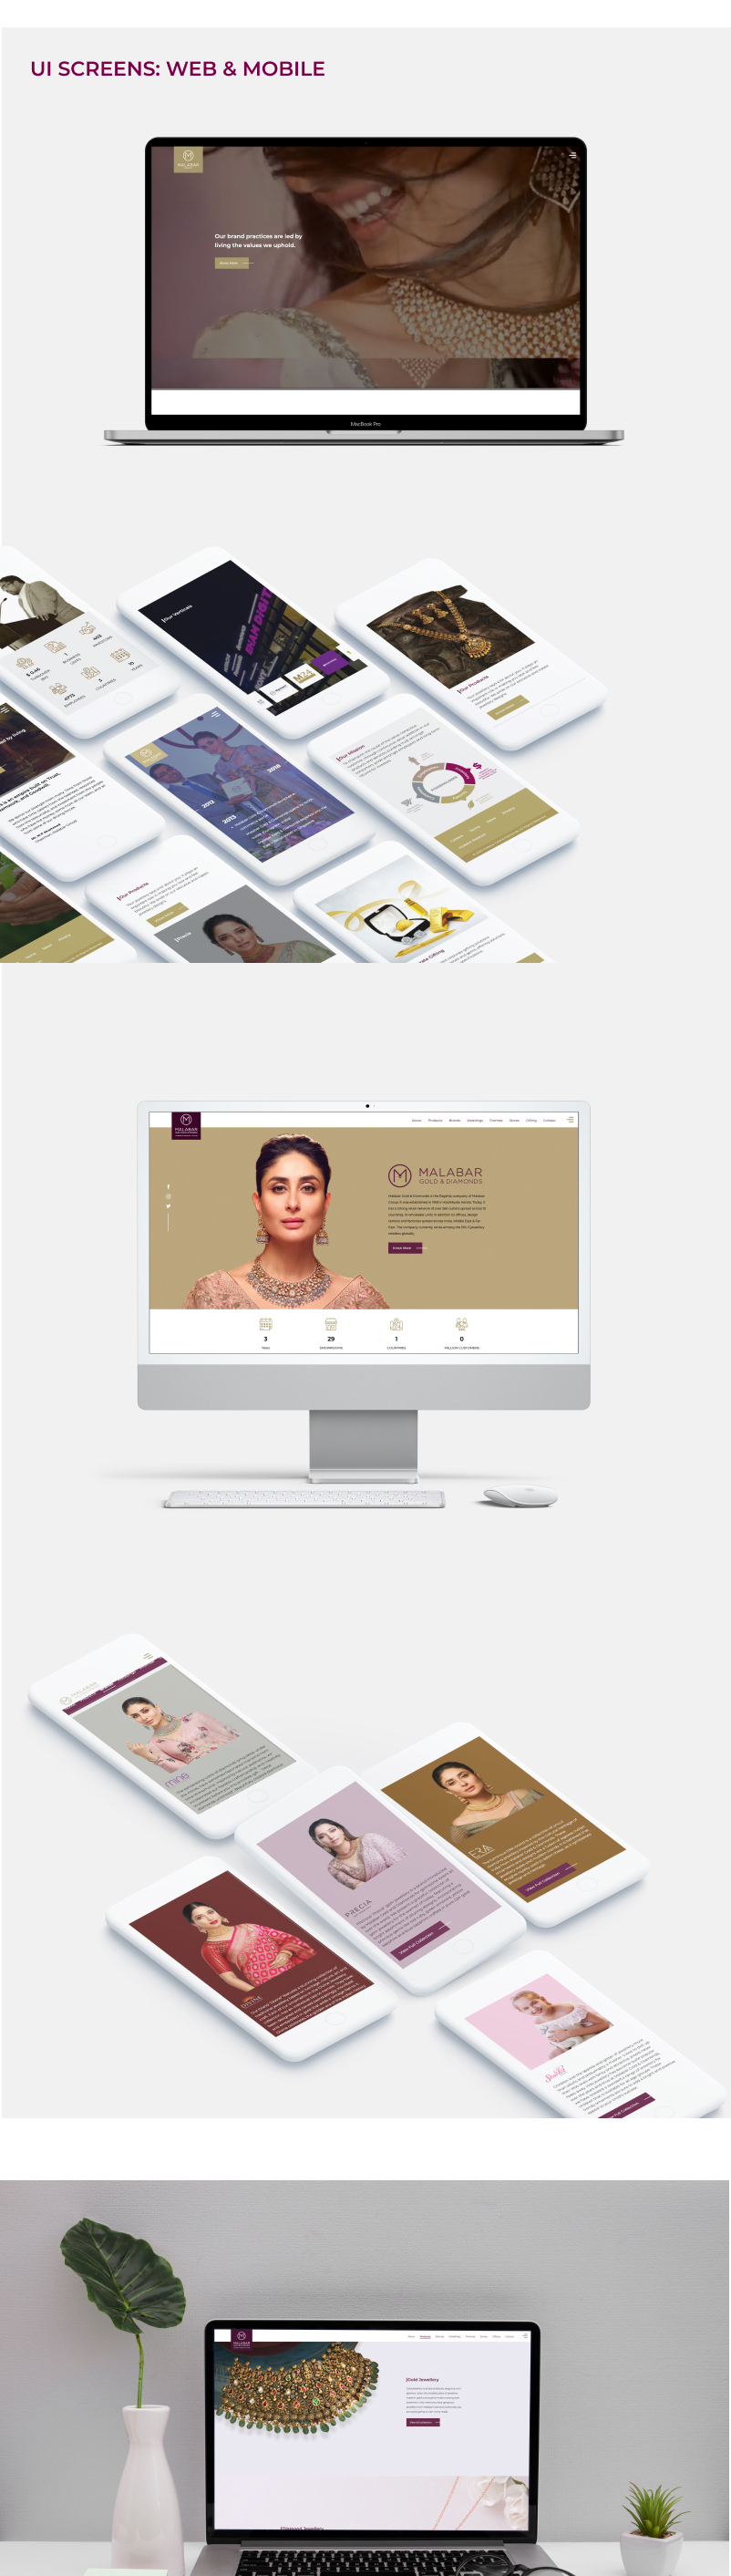 UI Screens: Web and Mobile design for Malabar Group | Yellow Slice